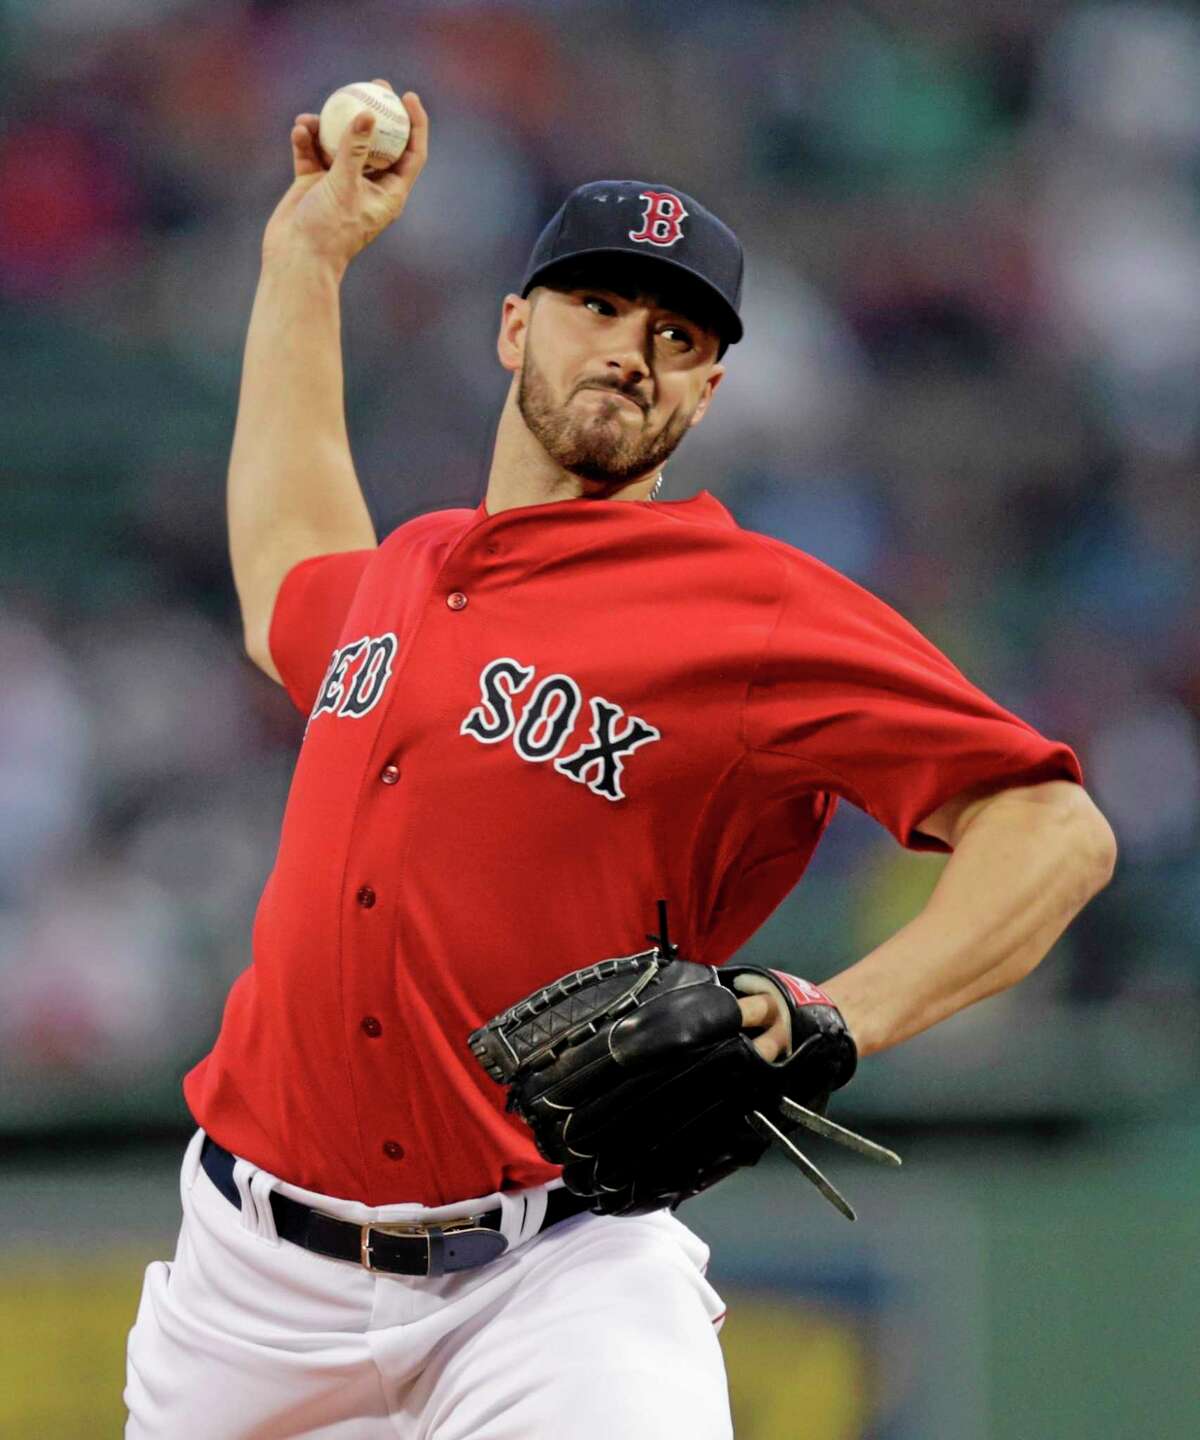 Boston Red Sox pitcher Brandon Workman delivers against the Tampa Bay Rays during the first inning of Friday’s game at Fenway Park in Boston.